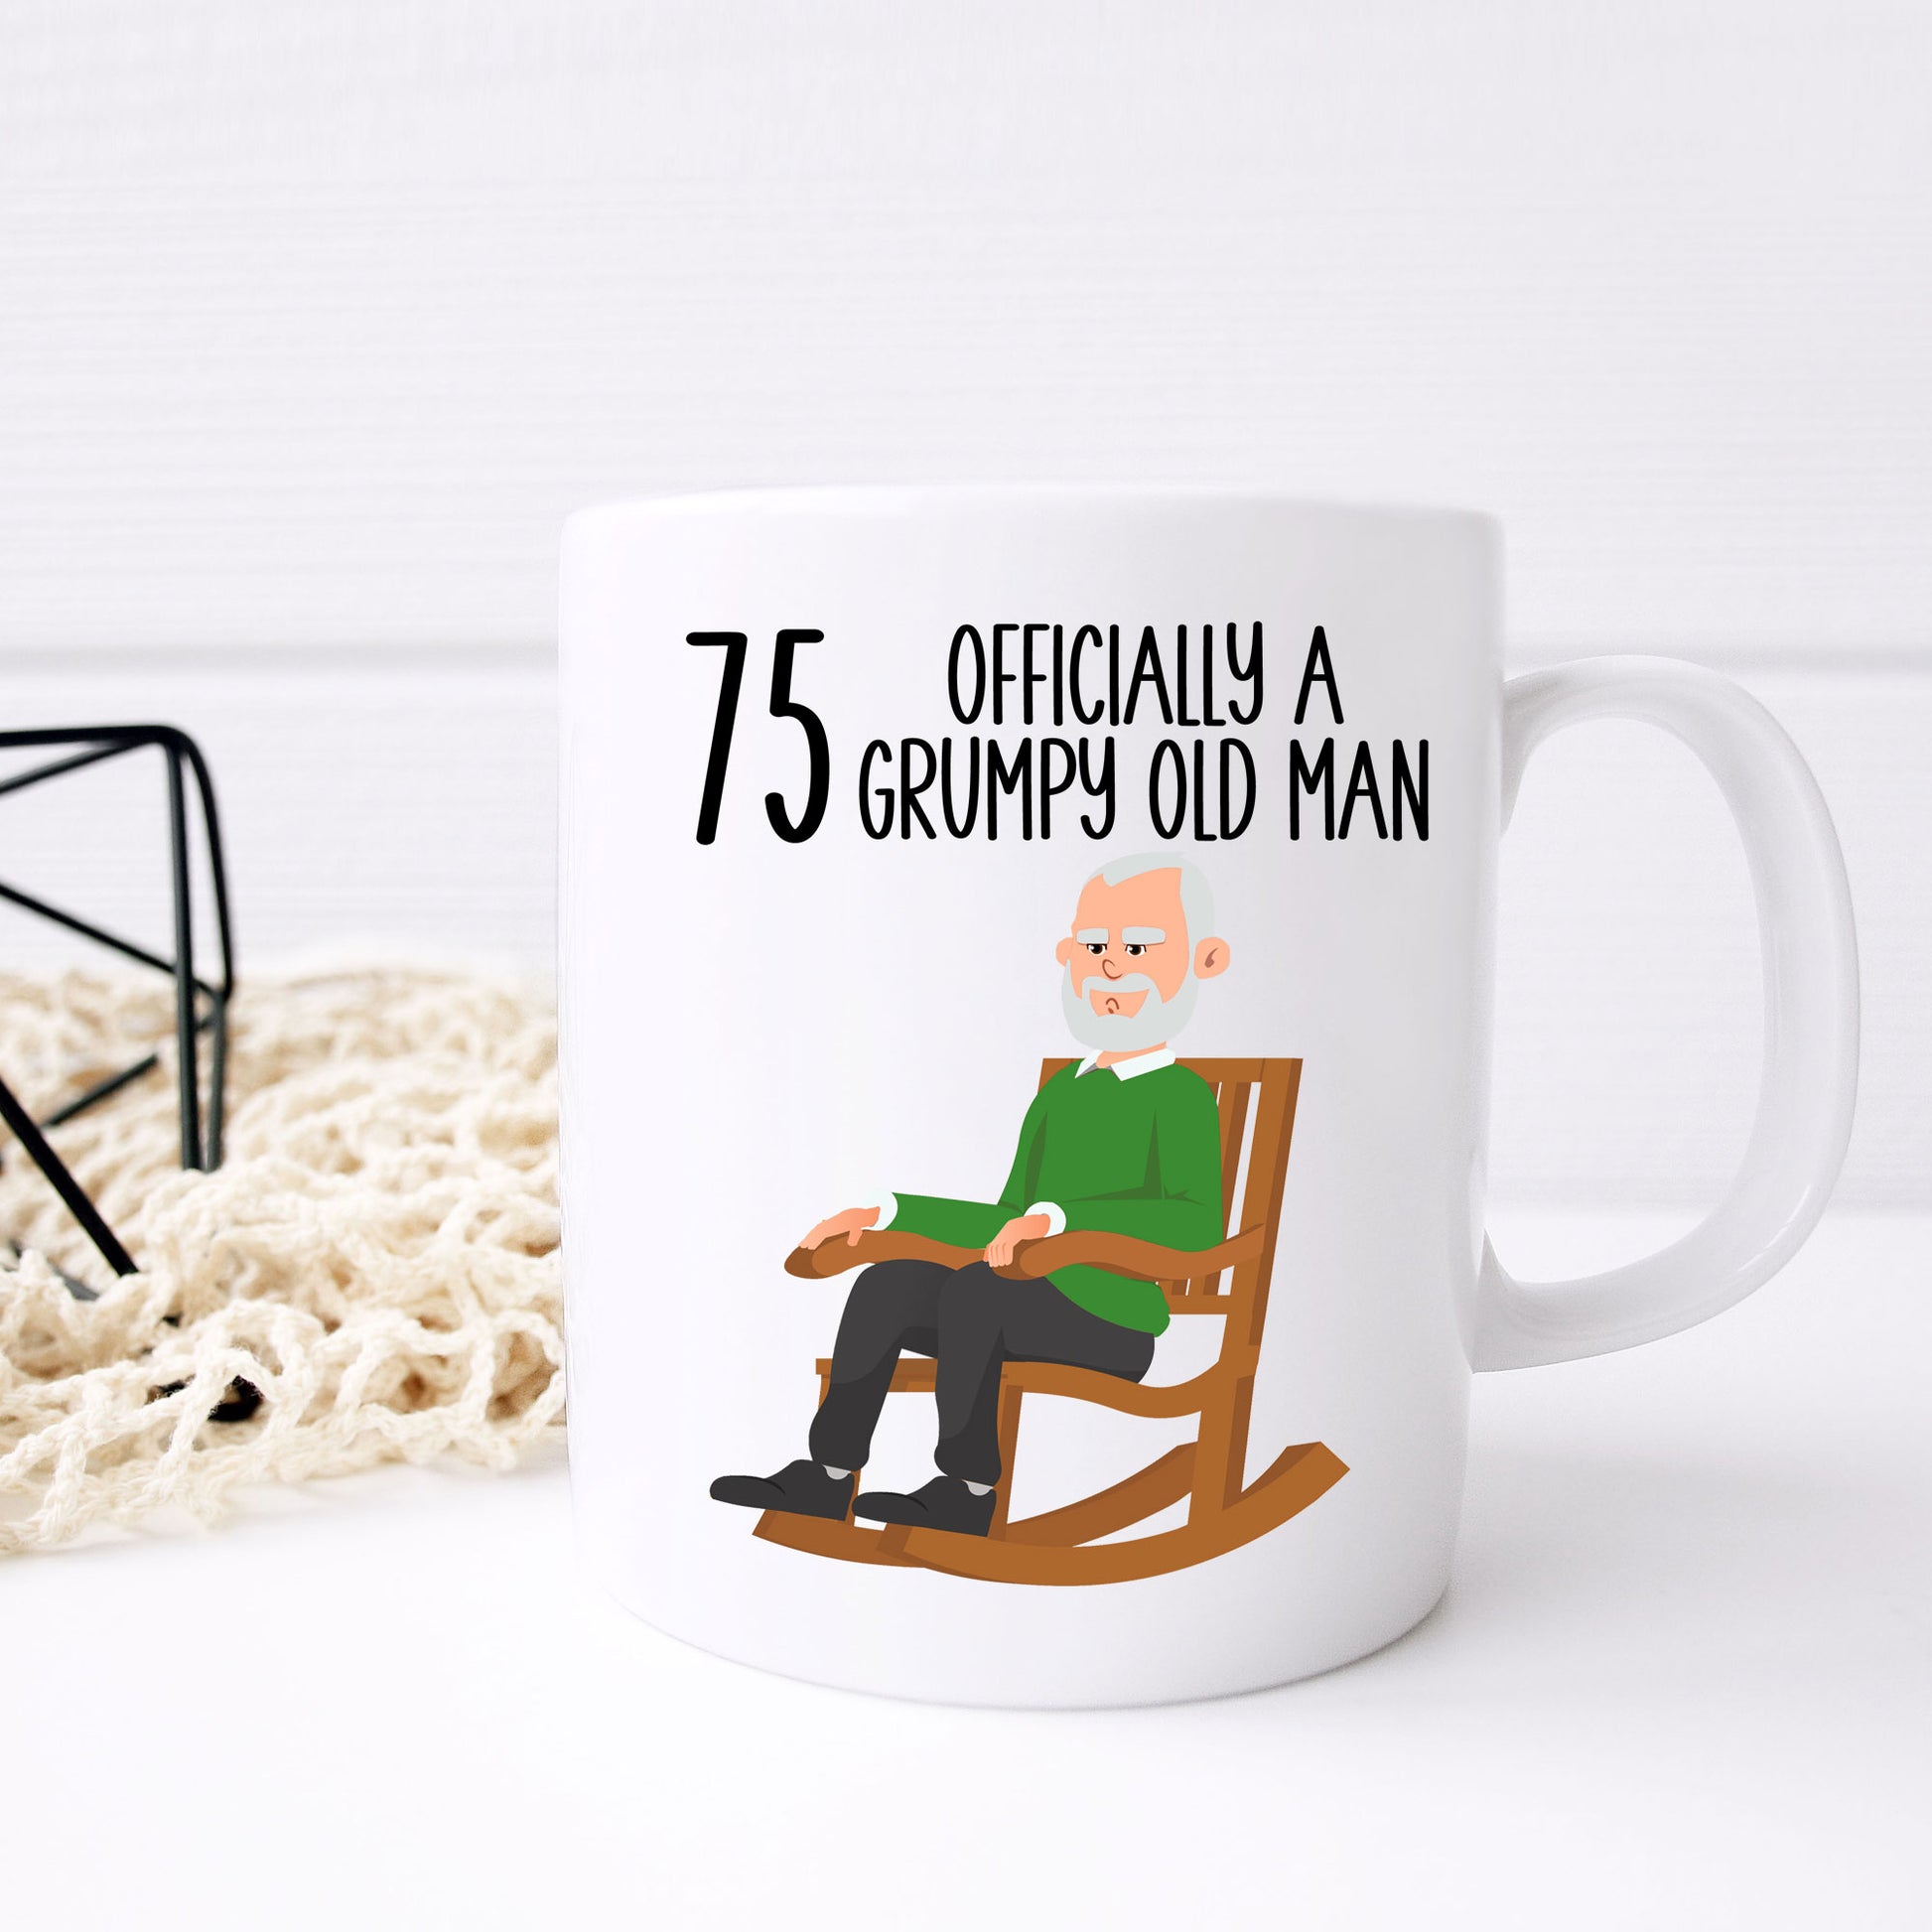 75 Officially A Grumpy Old Man Mug and/or Coaster Gift  - Always Looking Good - Mug On Its Own  